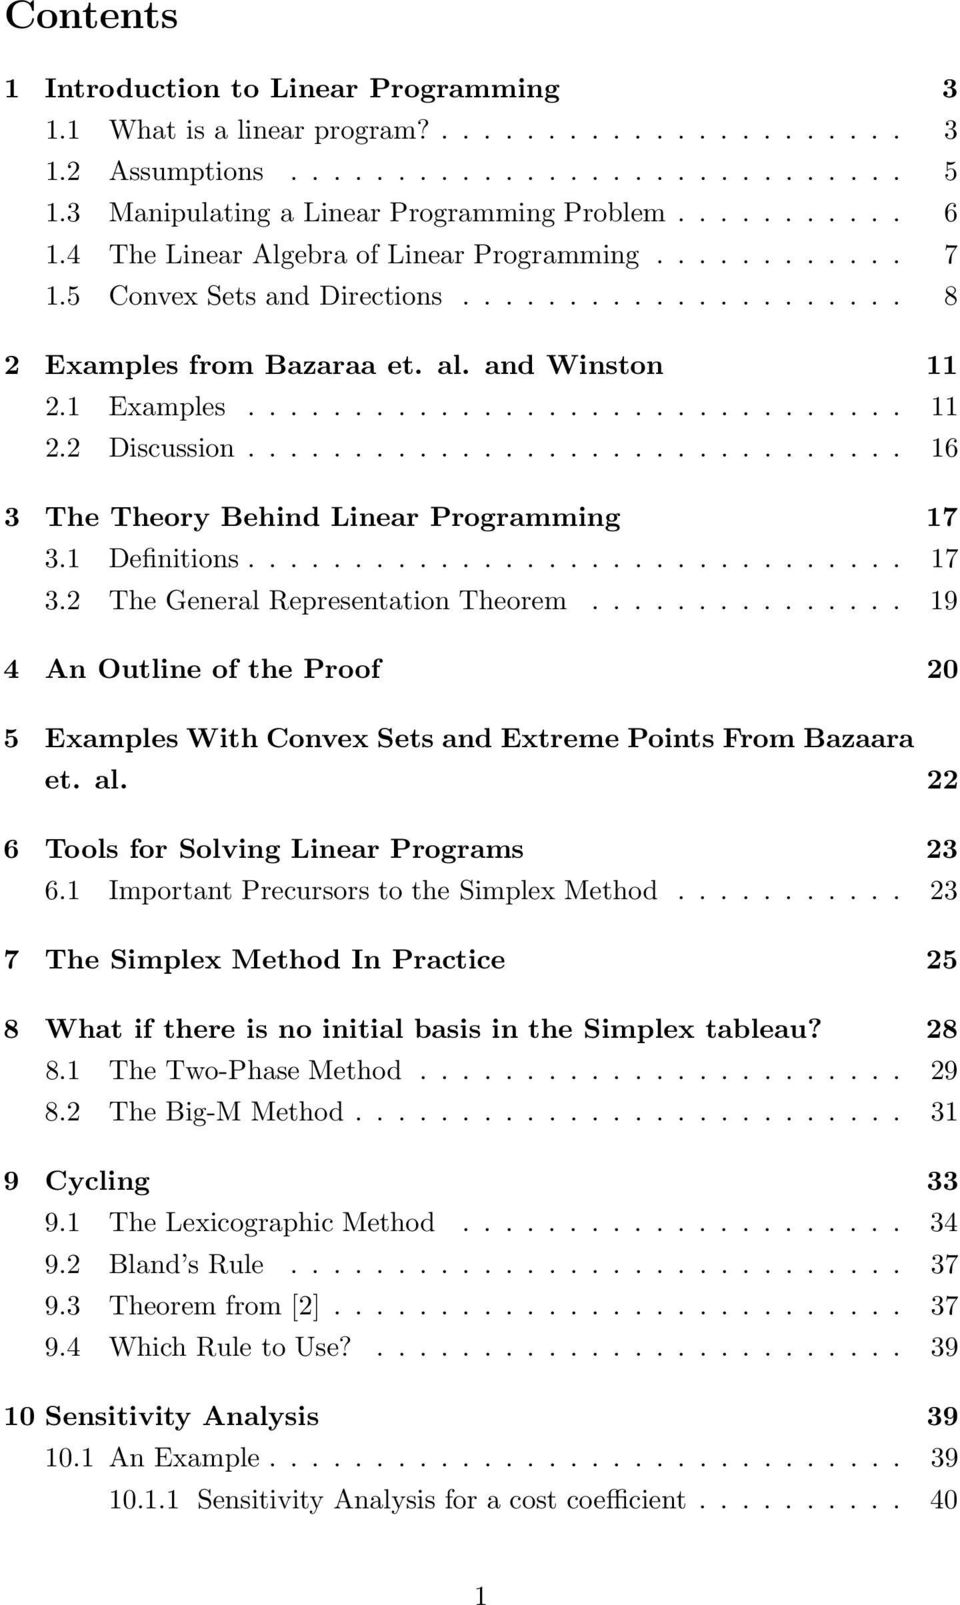 linear programming and its applications